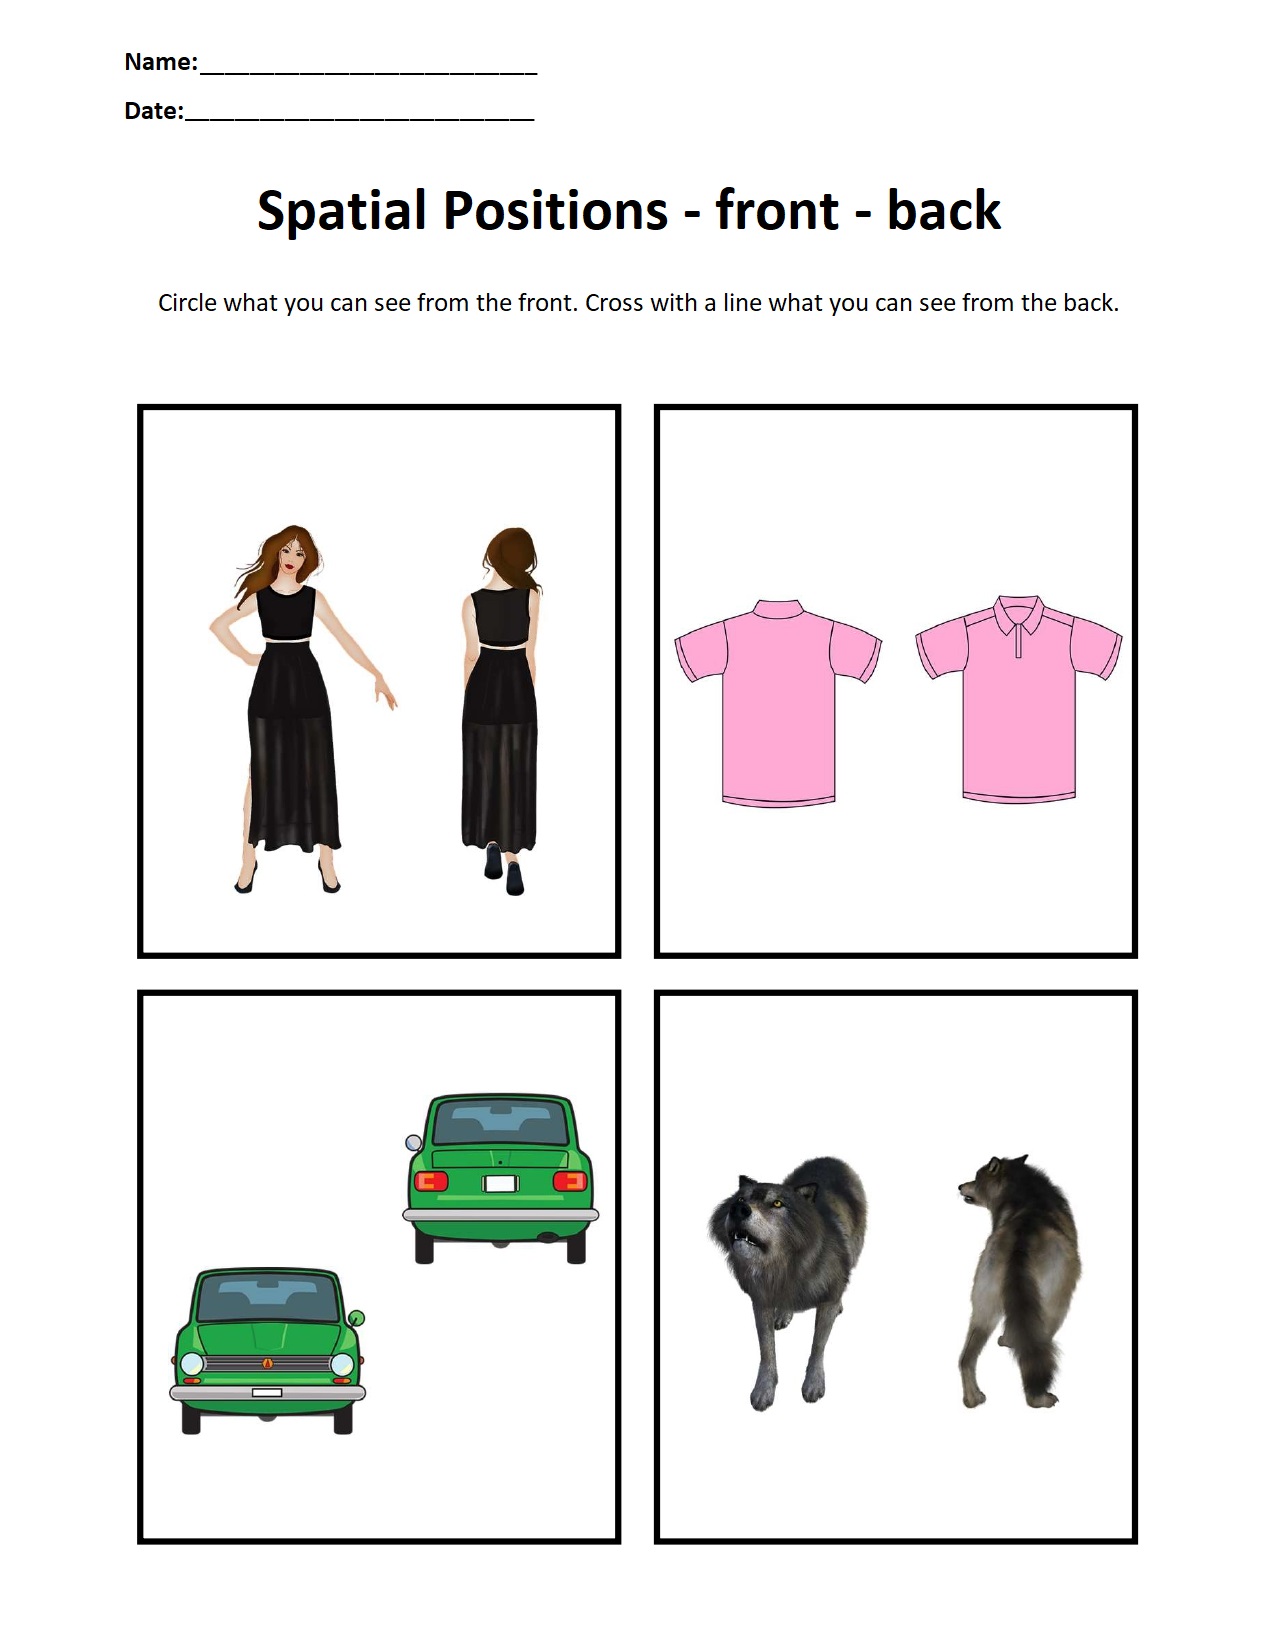 Spatial Positions - front - back.jpg